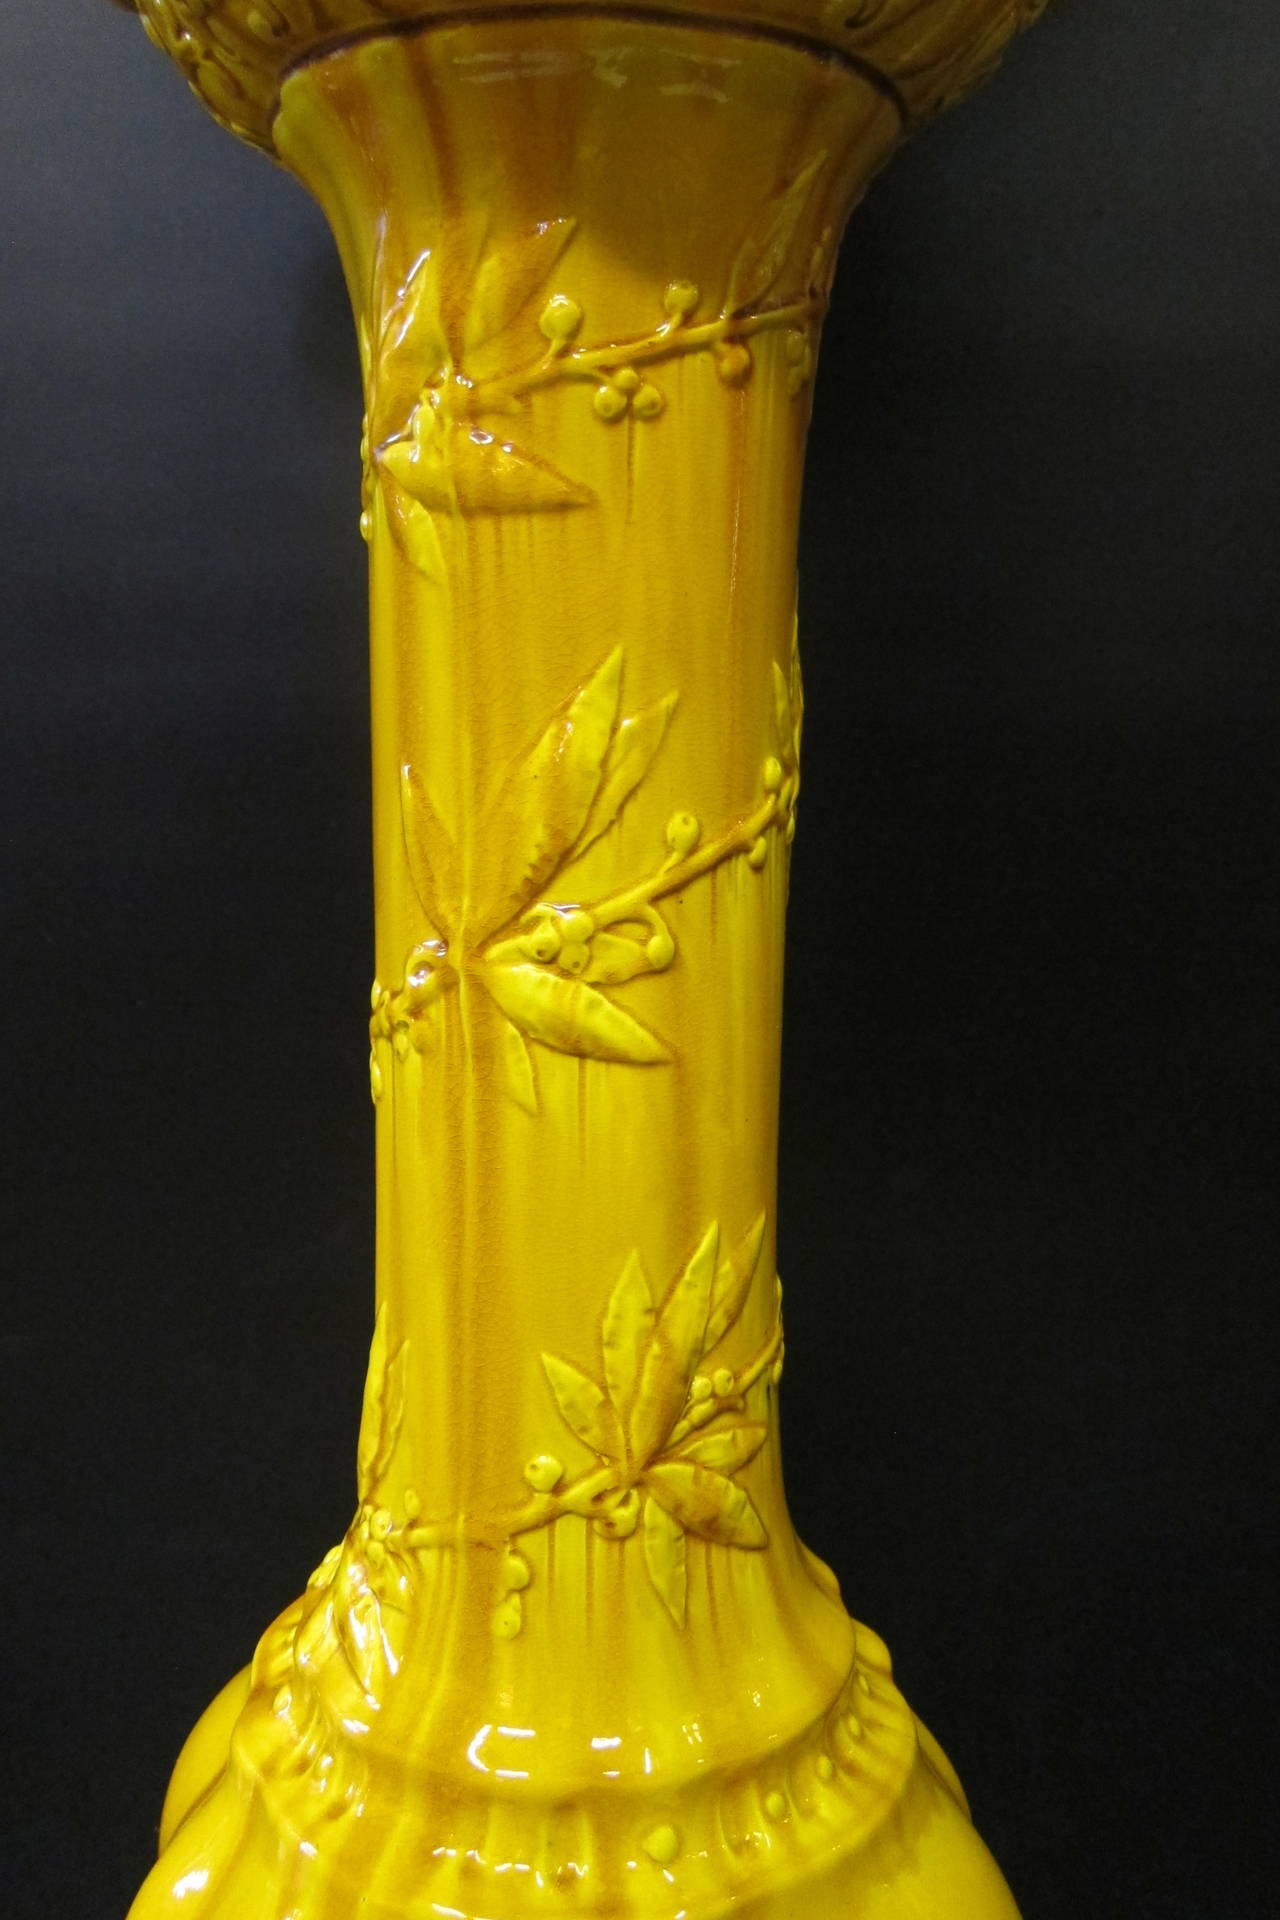 A glowing example of fine English Pottery from the Wardle company. Created in the 19th century, both jardiniere & pedestal are vividly painted in a golden mustard-yellow color. The pottery is designed with a vined berry pattern and accented with a